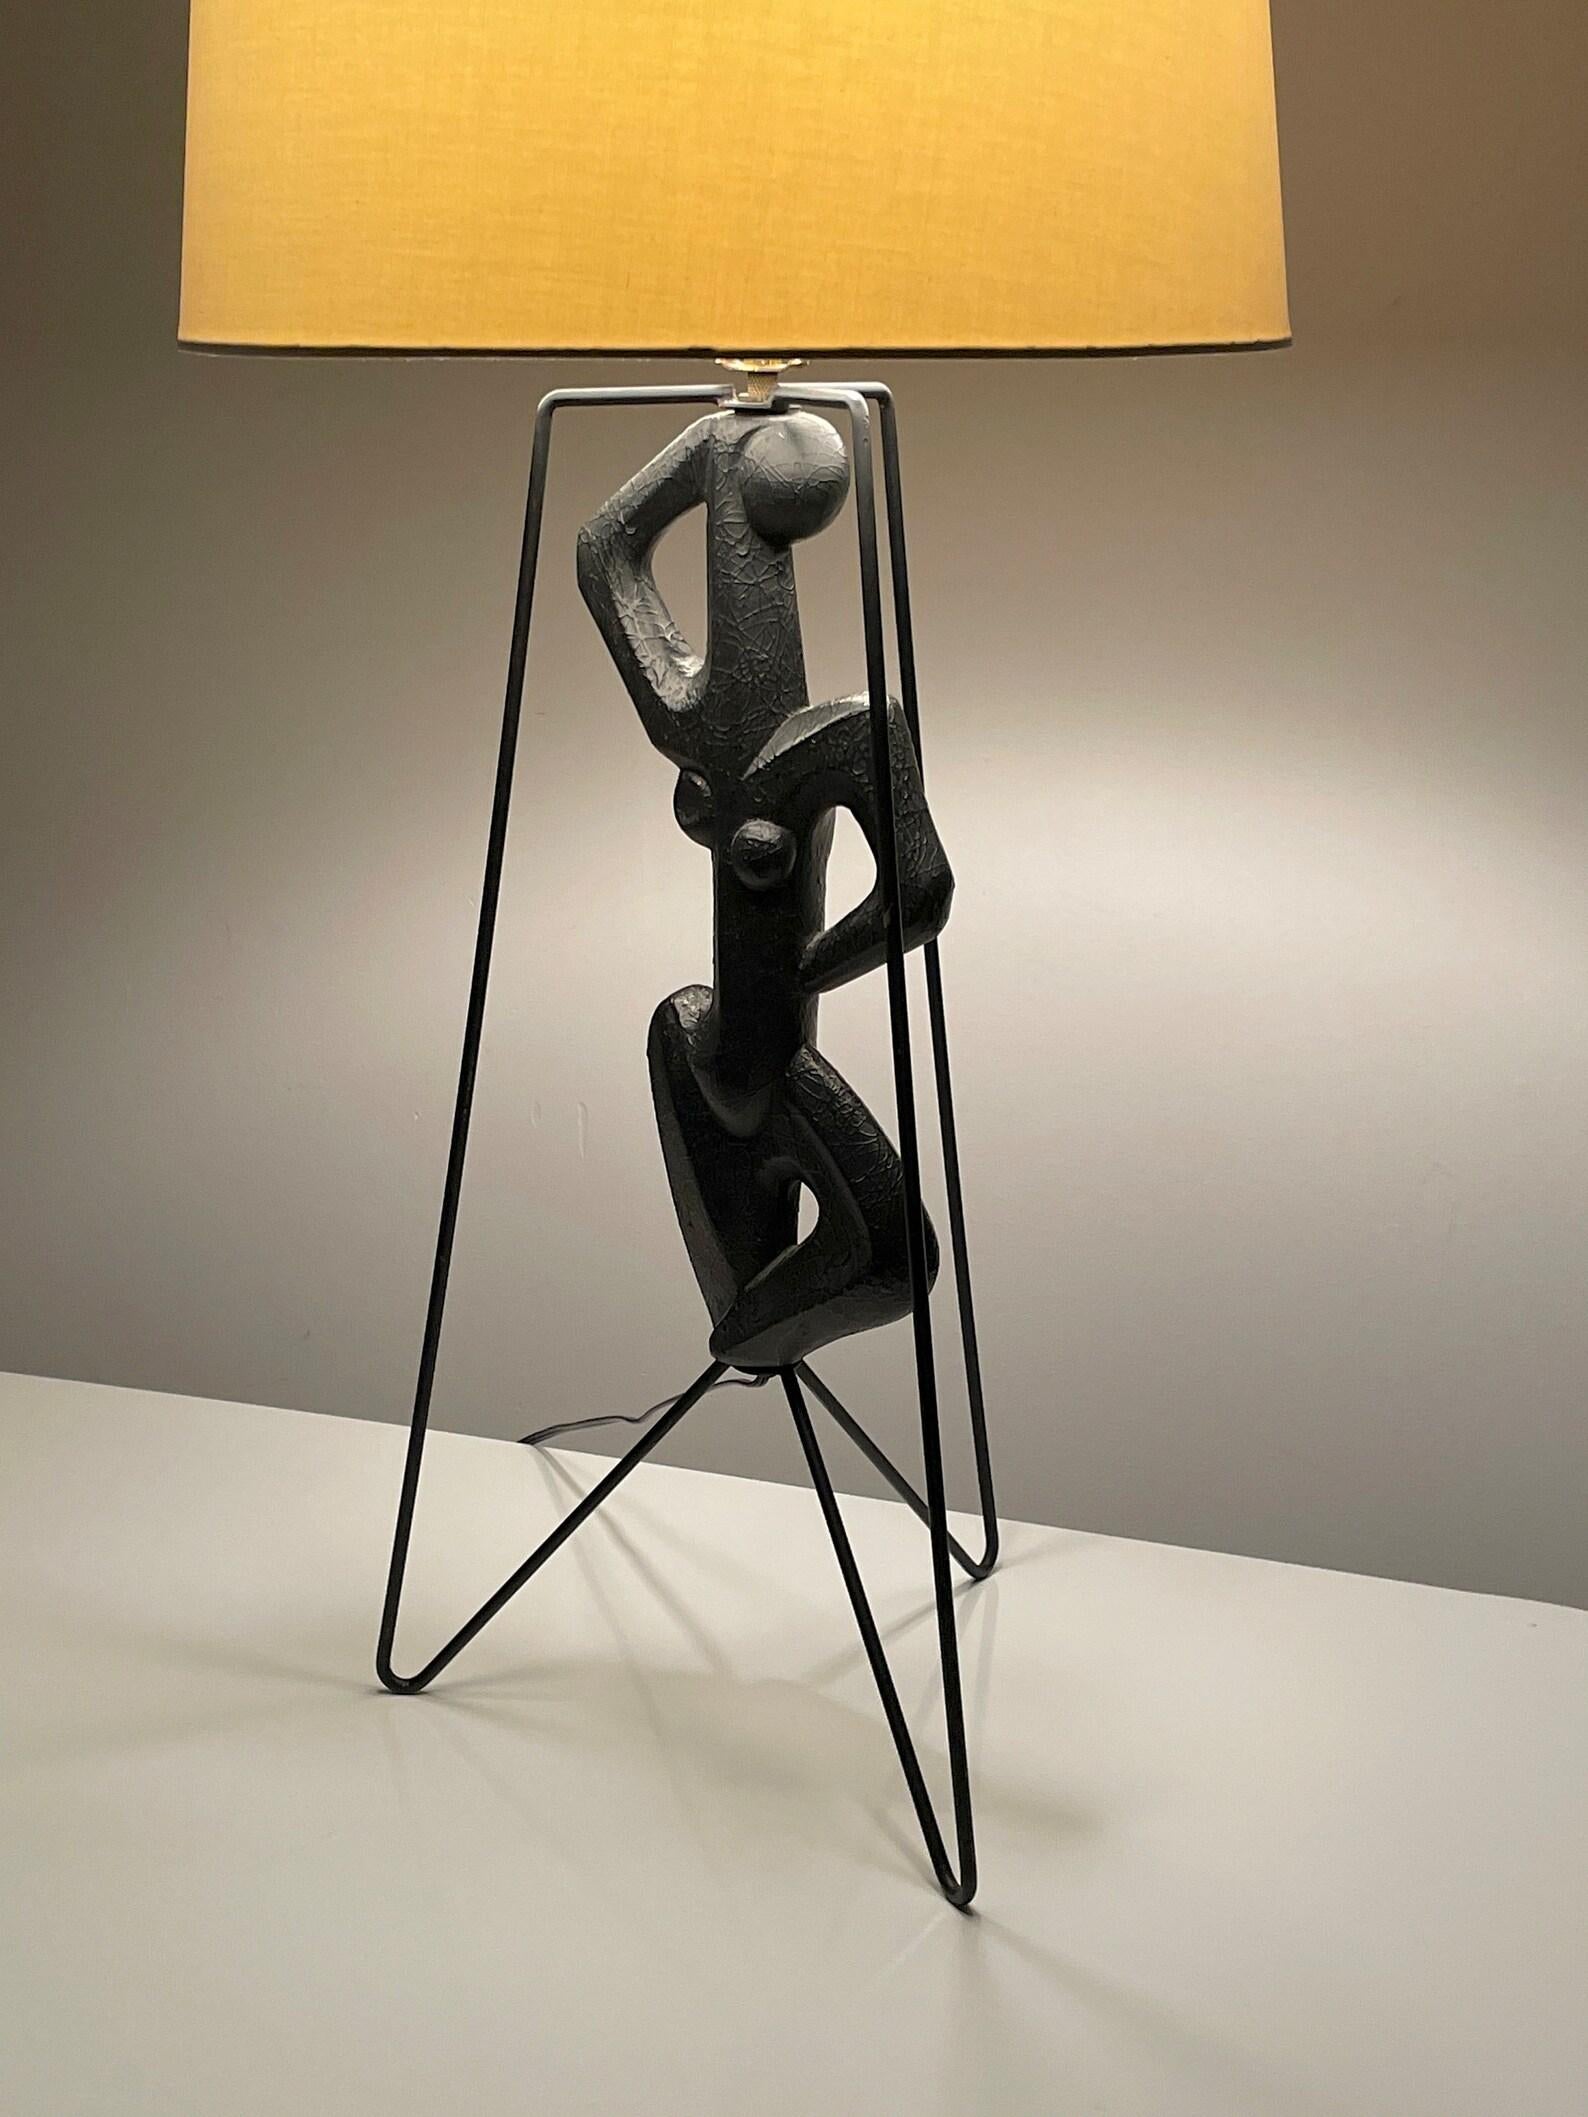 20th Century Modernist Frederic Weinberg Figural Iron Hairpin Table Lamp 1950s  For Sale